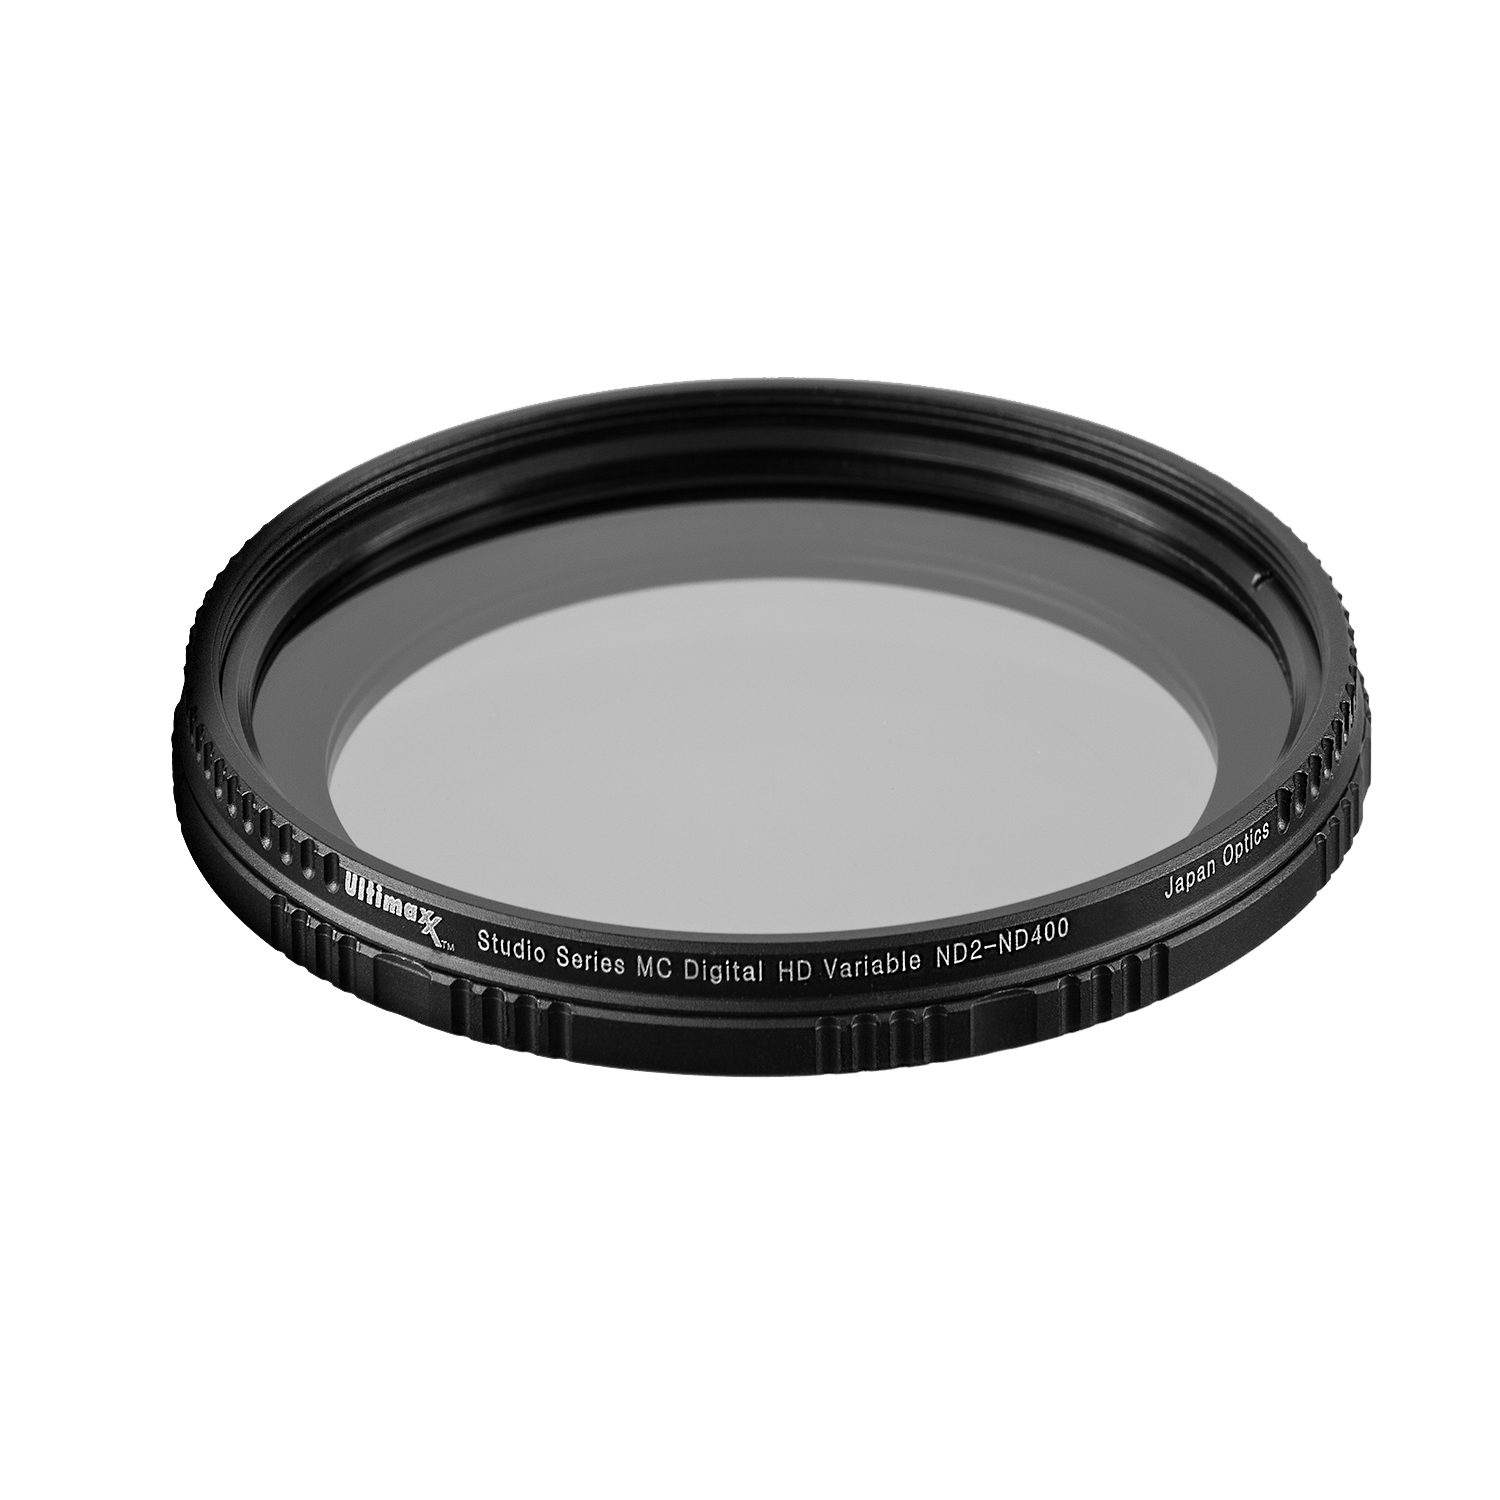 Ultimaxx 67mm VARIABLE NEUTRAL DENSITY FILTER ND2-ND400